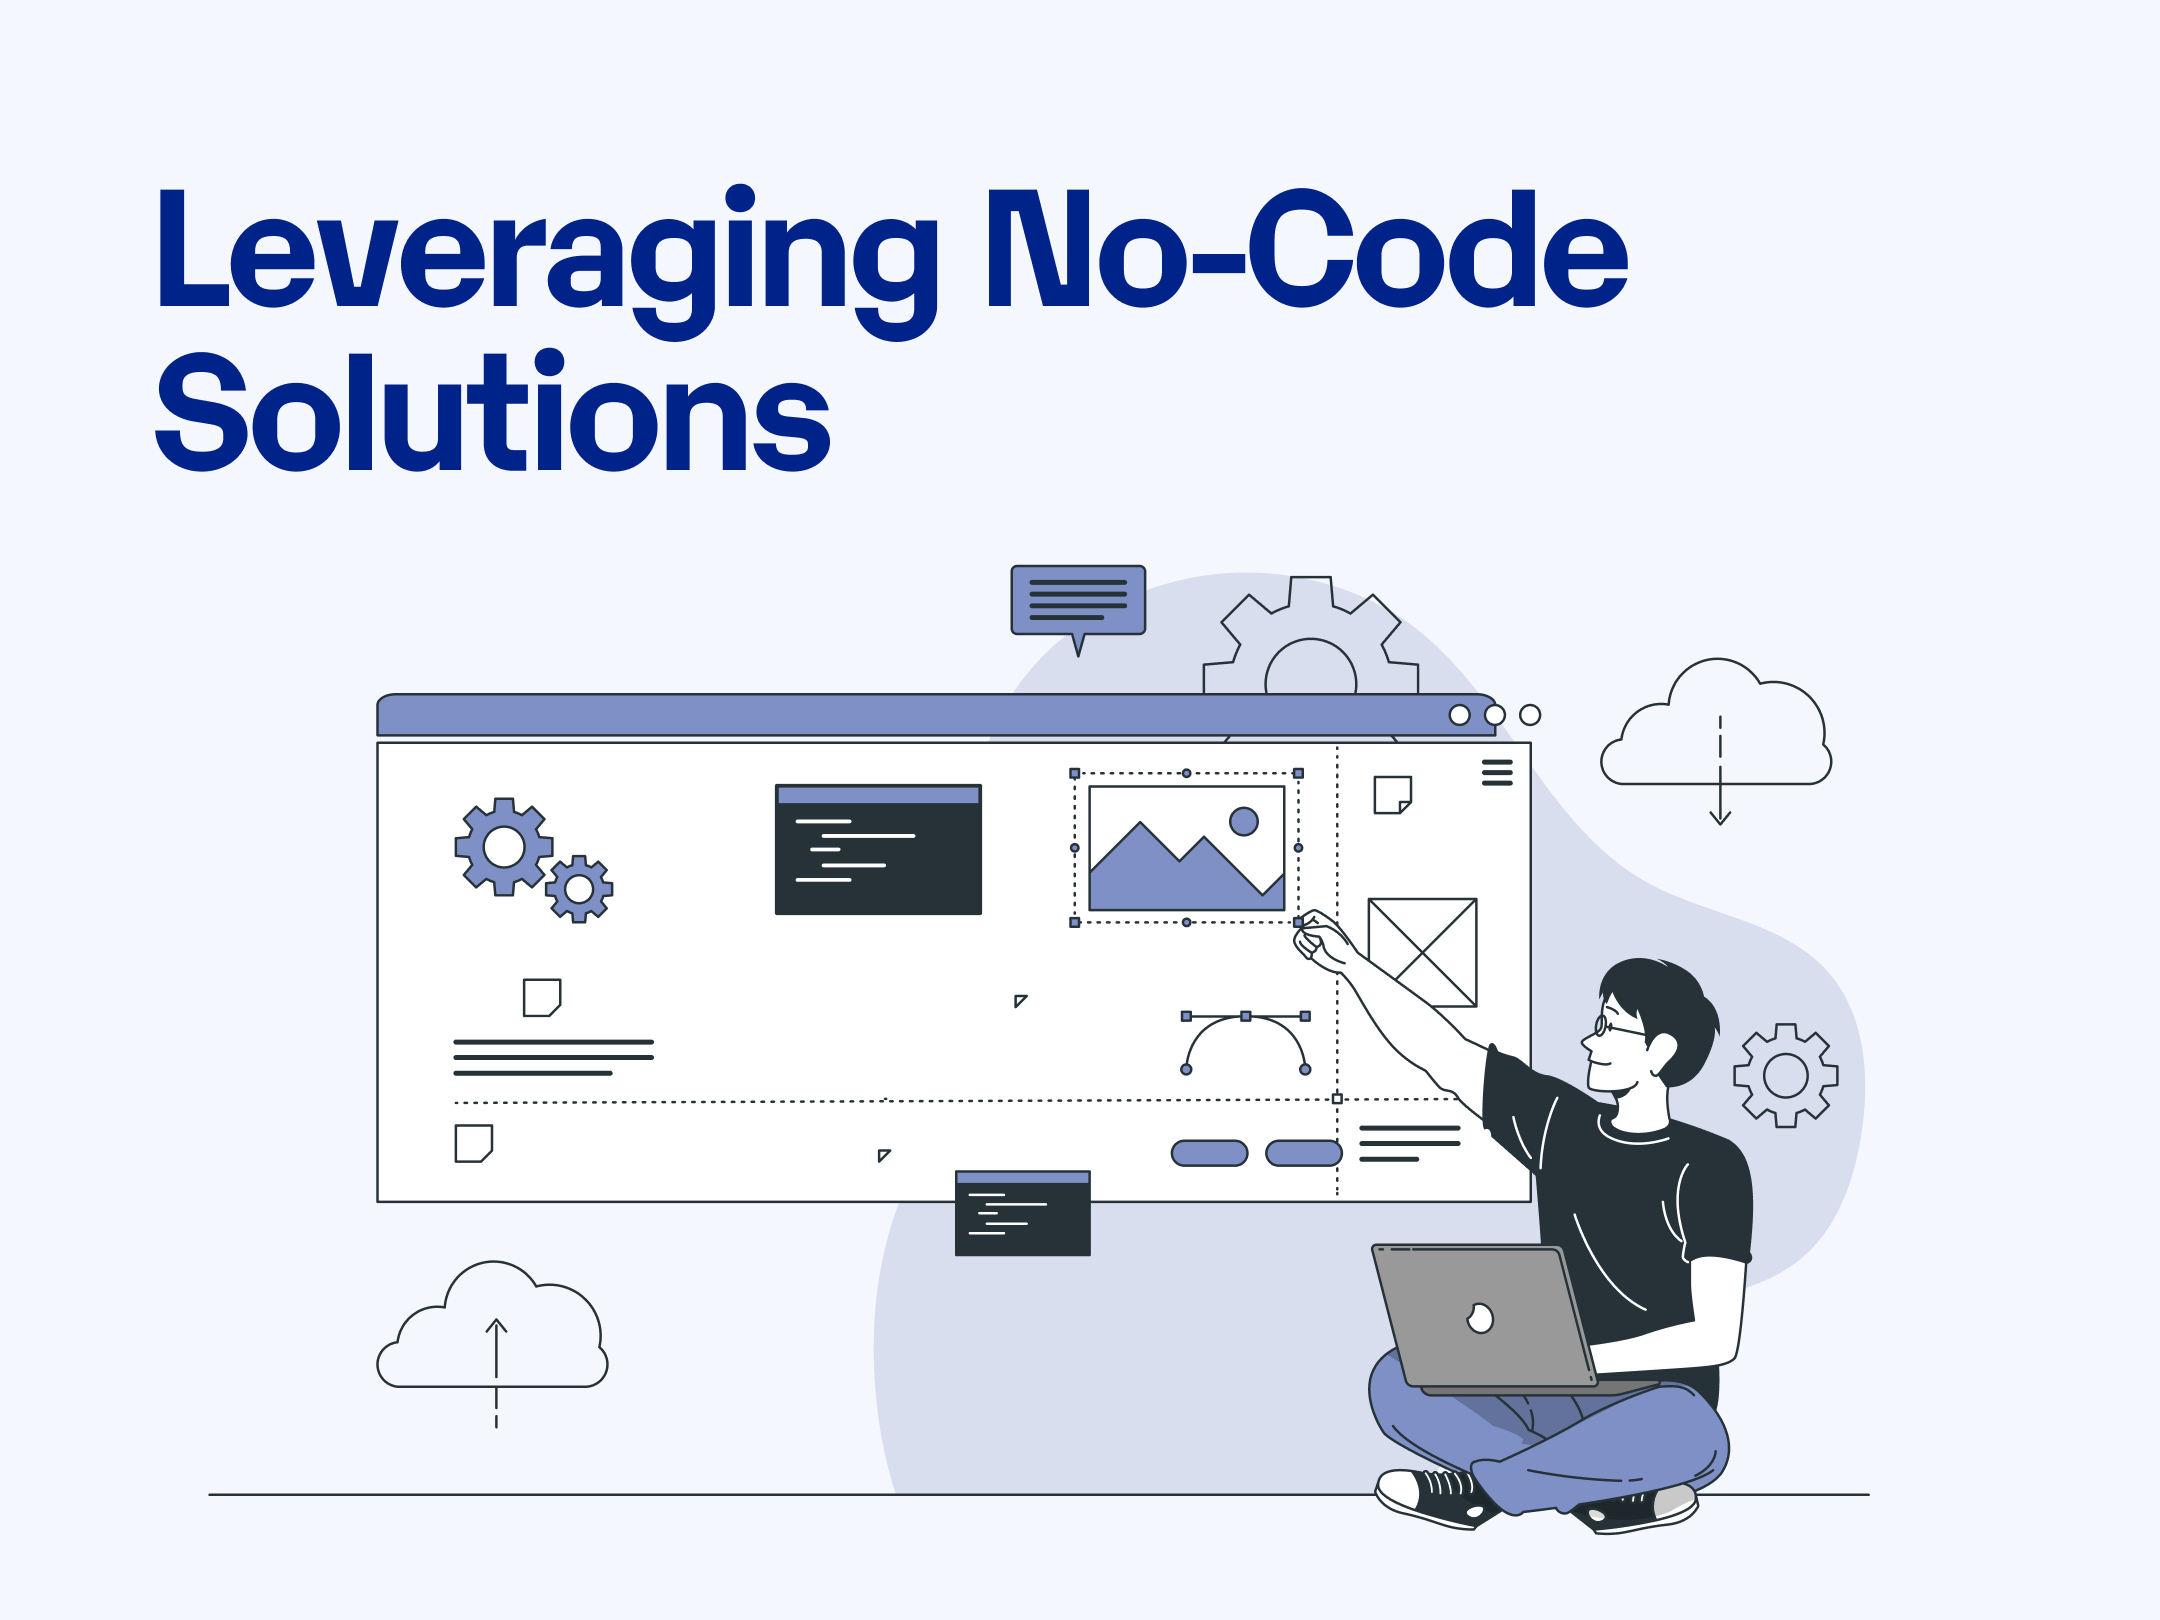 Leveraging No-Code Solutions